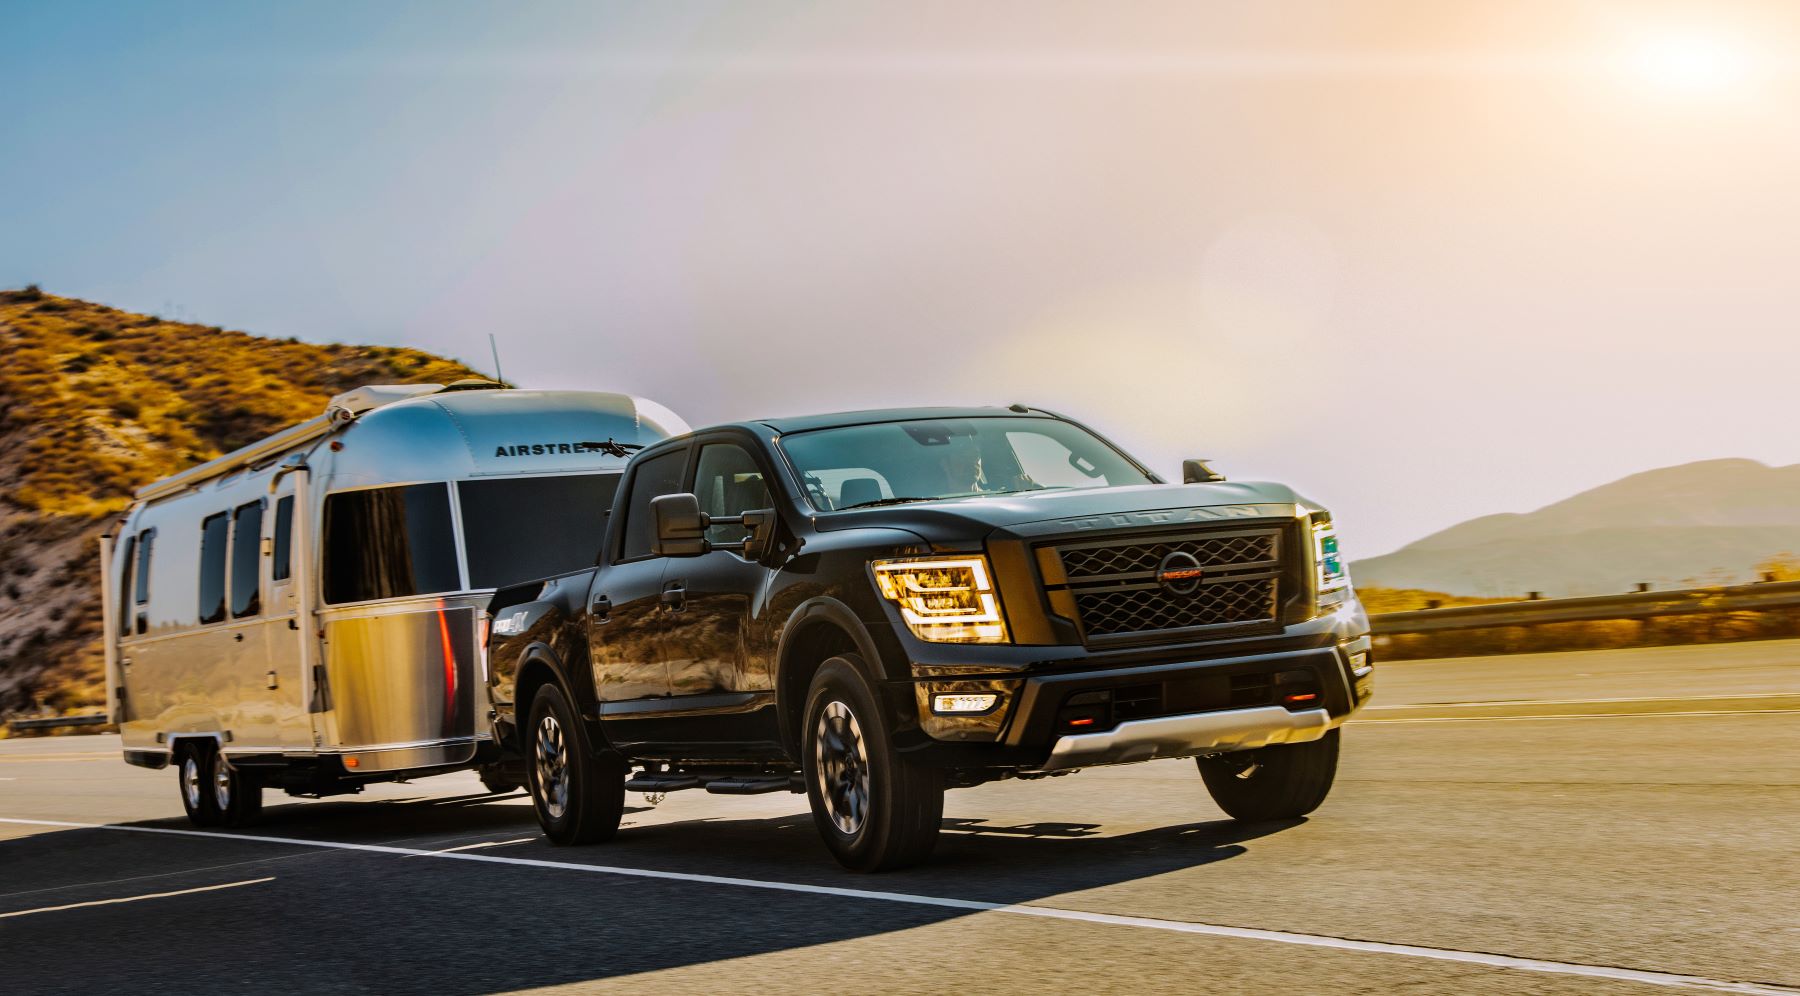 The 2021 Nissan Titan full-size pickup truck towing an Airstream trailer